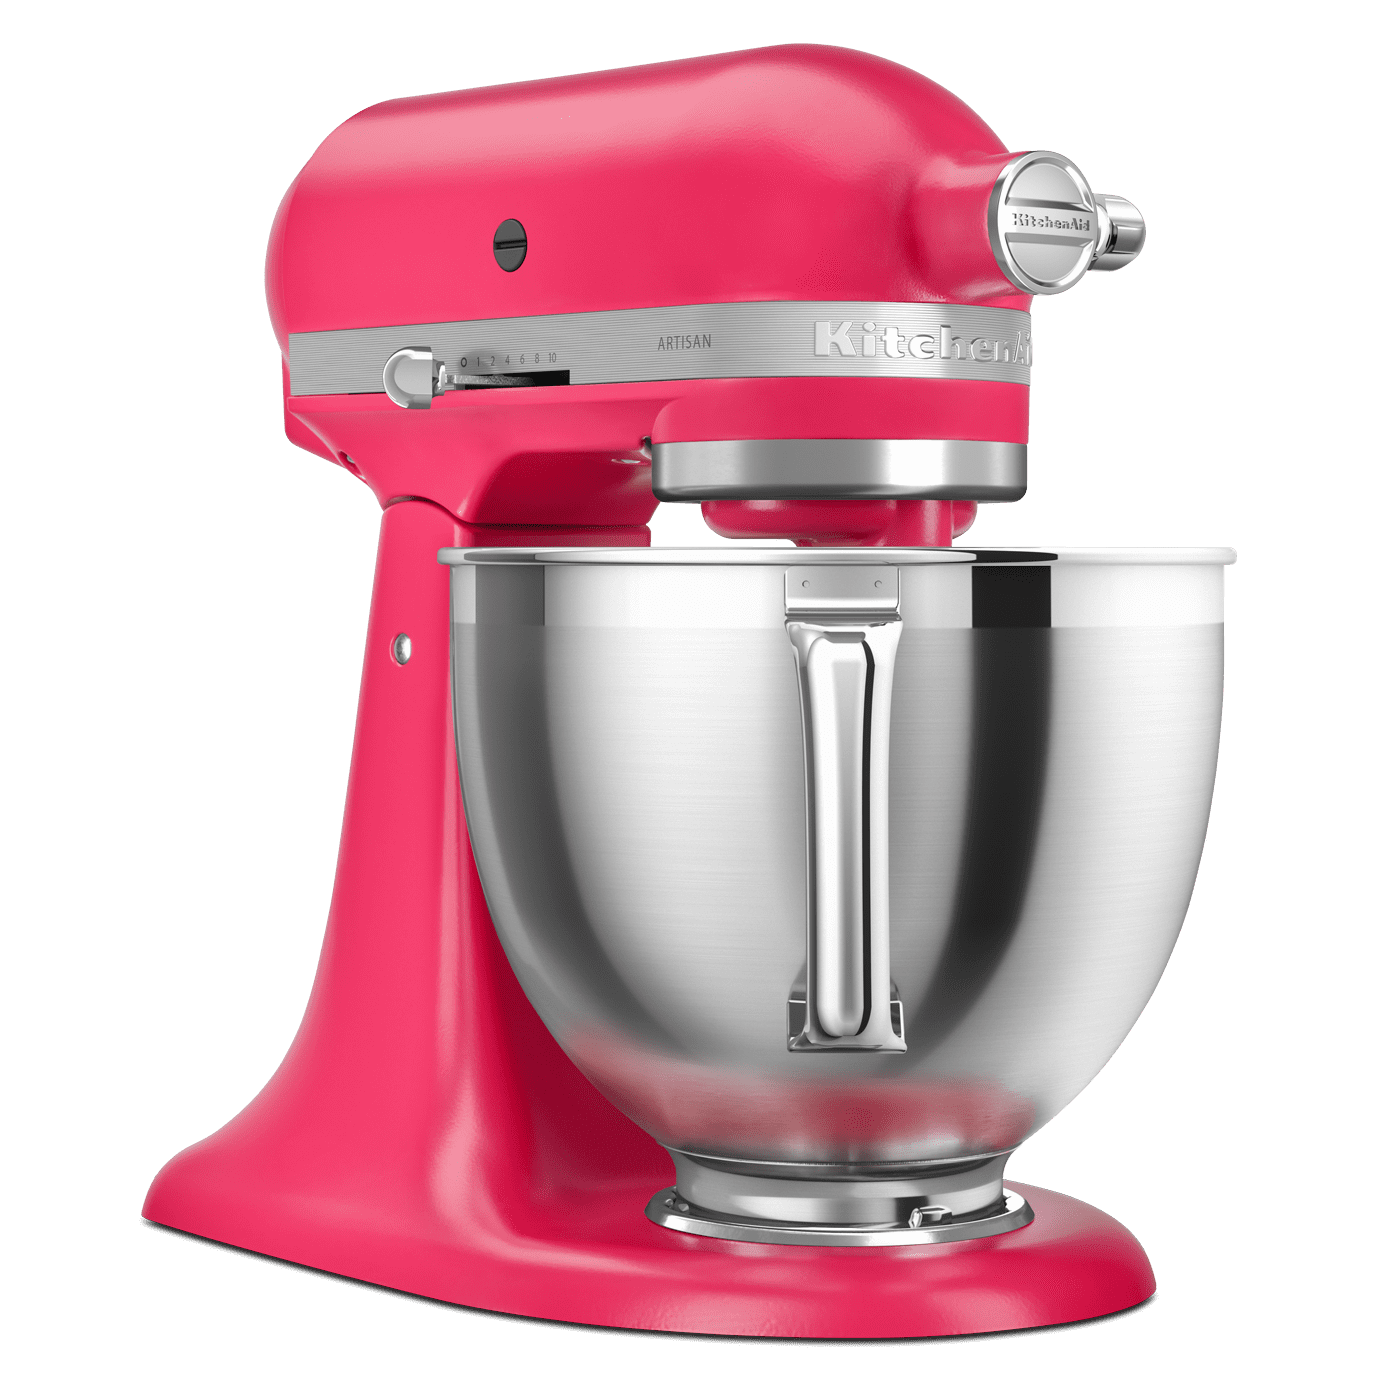 https://cdn.apartmenttherapy.info/image/upload/v1675793501/commerce/KitchenAid_2023_COTY_Hibiscus_stand_mixer_product.png